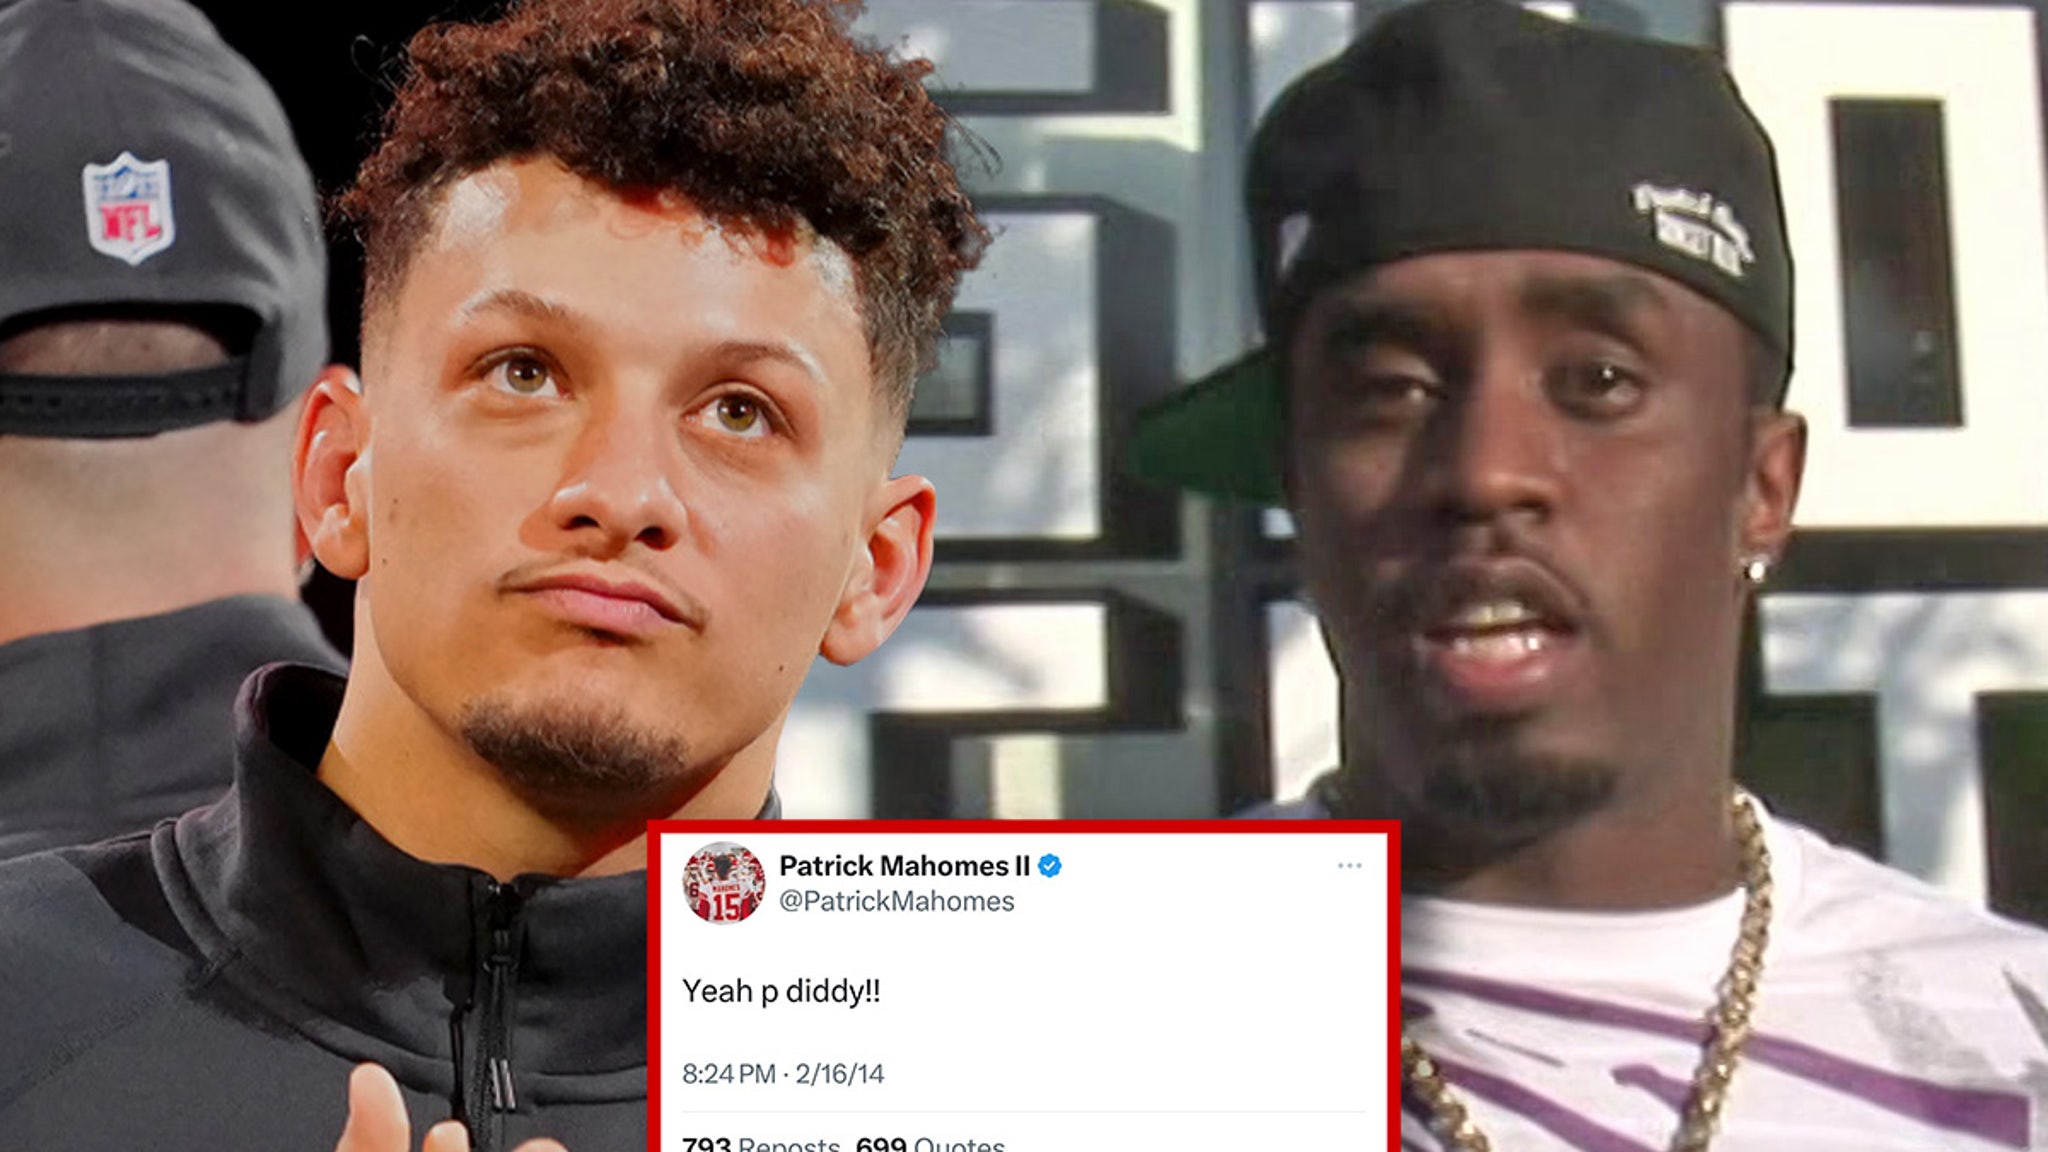 Patrick Mahomes' 'P Diddy' Tweets Deleted Amid Sex Trafficking Investigation